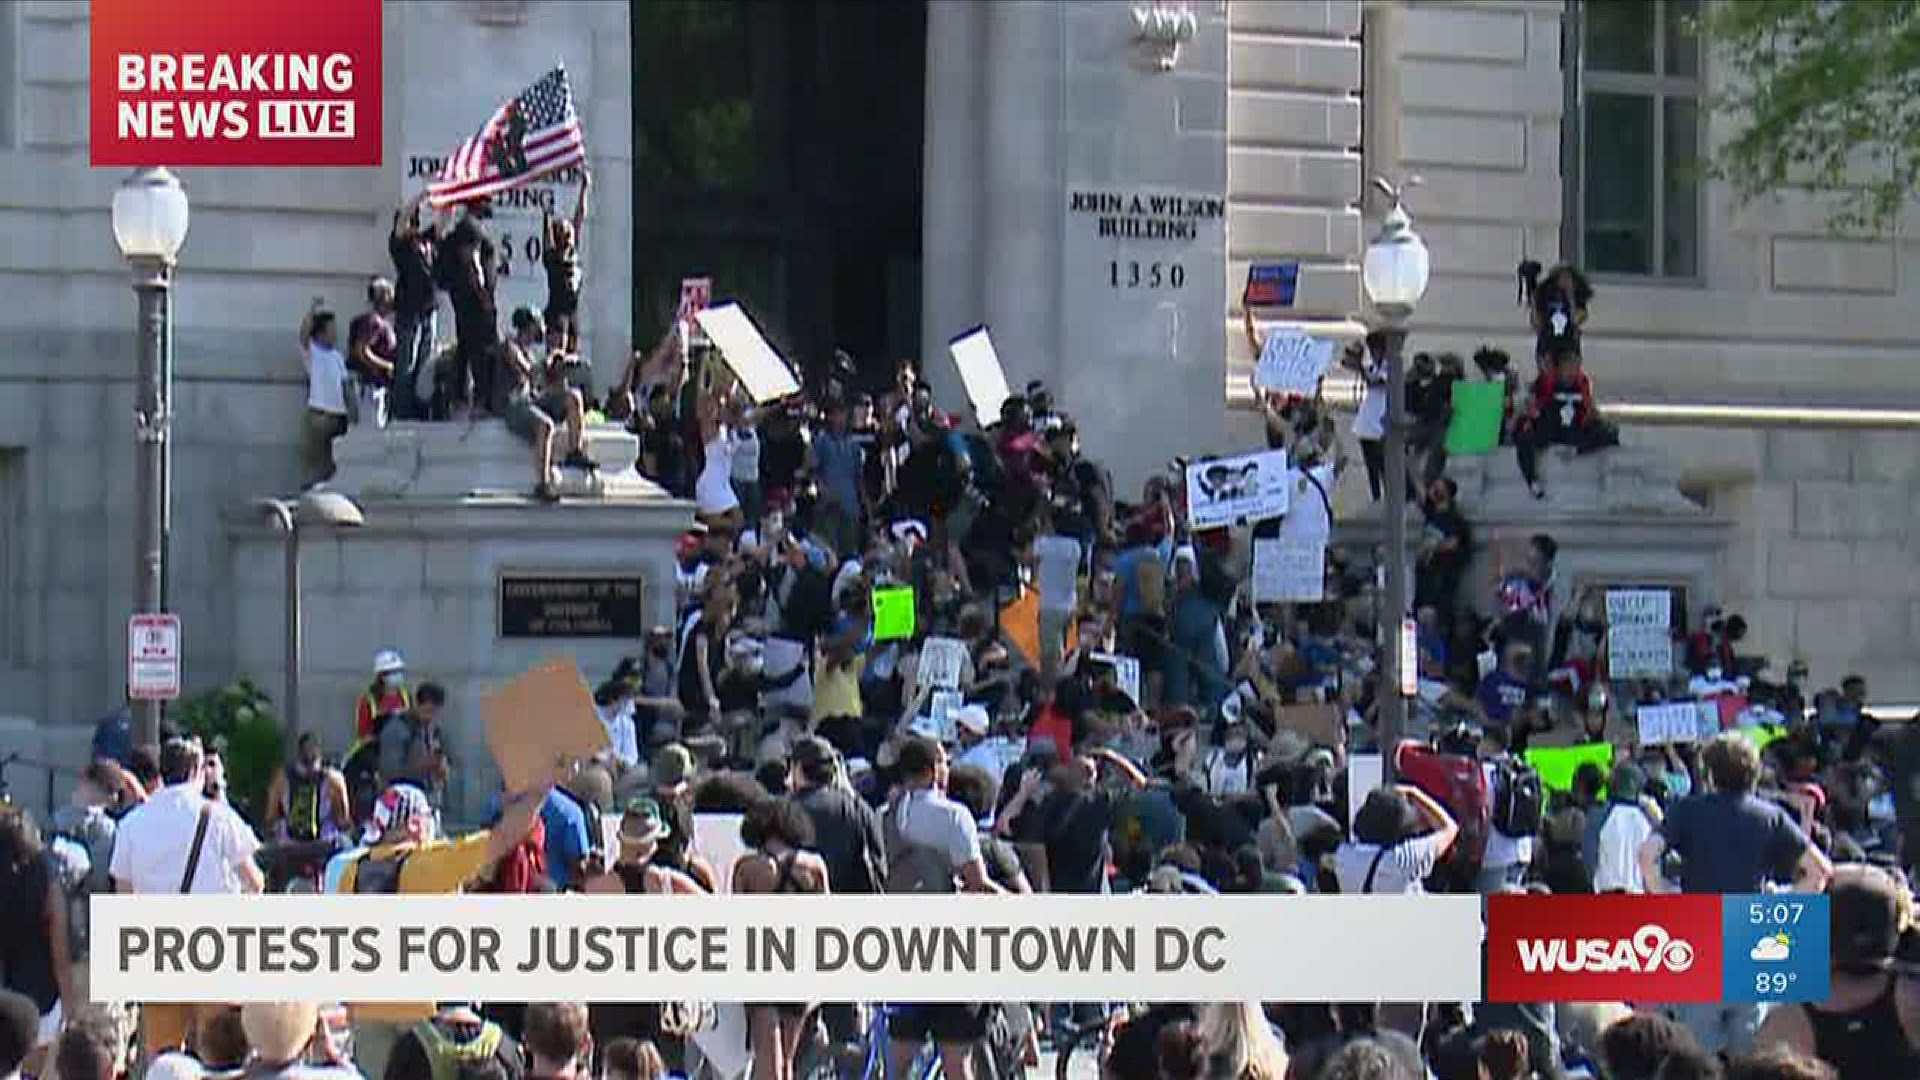 Thousands are gathering in D.C. for the 9th day of Justice for George Floyd protests.